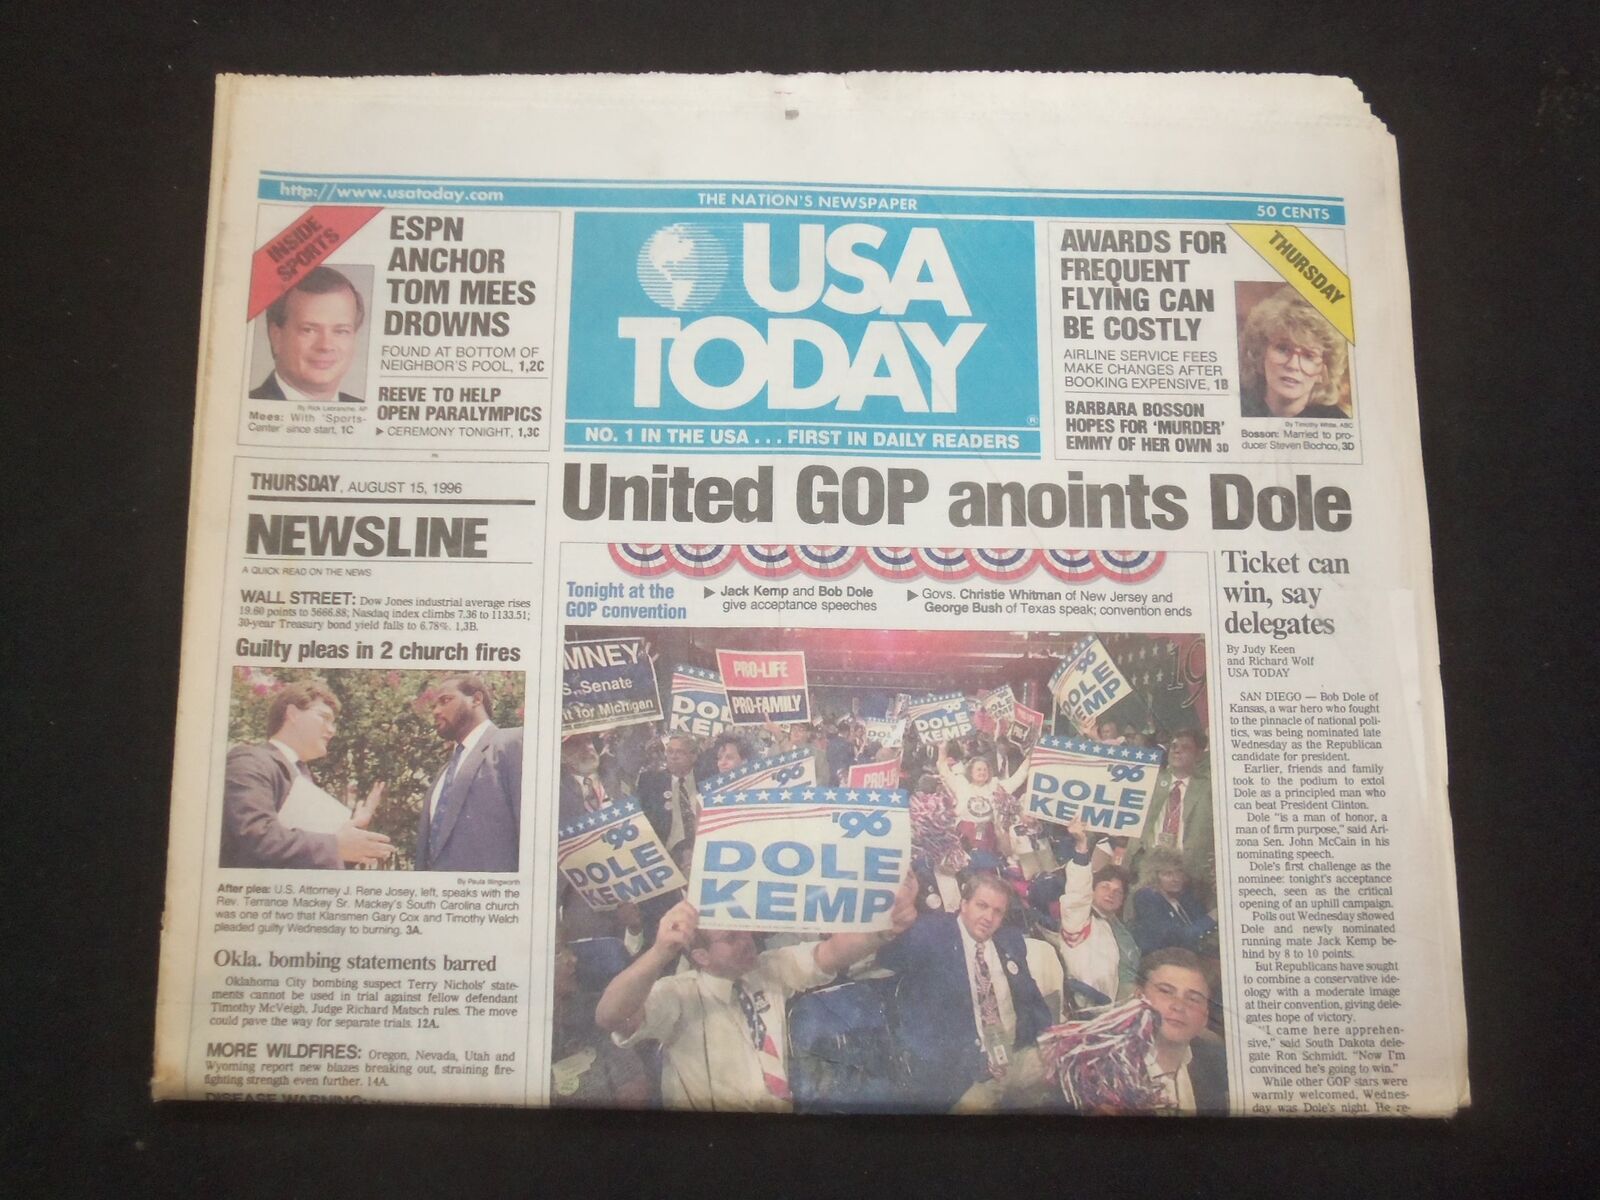 1996 AUGUST 15 USA TODAY NEWSPAPER - UNITED GOP ANOINTS DOLE - NP 7827